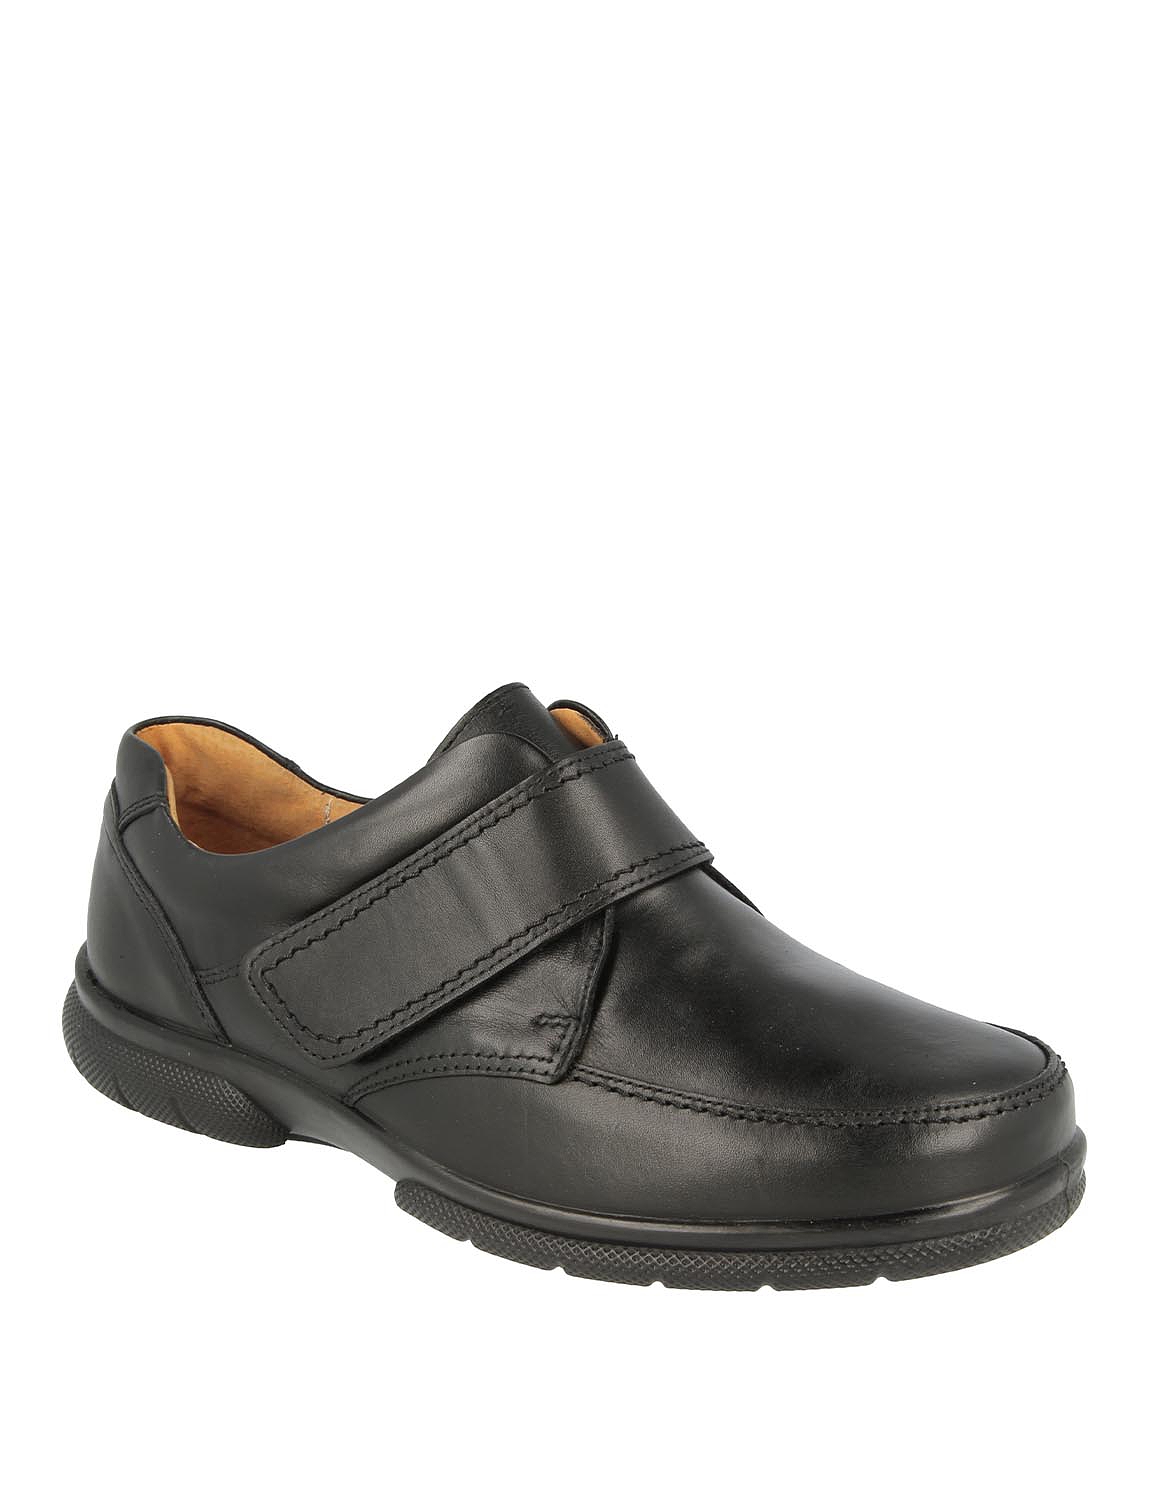 Mens Db Shoes Havant Leather Touch Fasten Extra Wide Fit Ee-4E | Chums